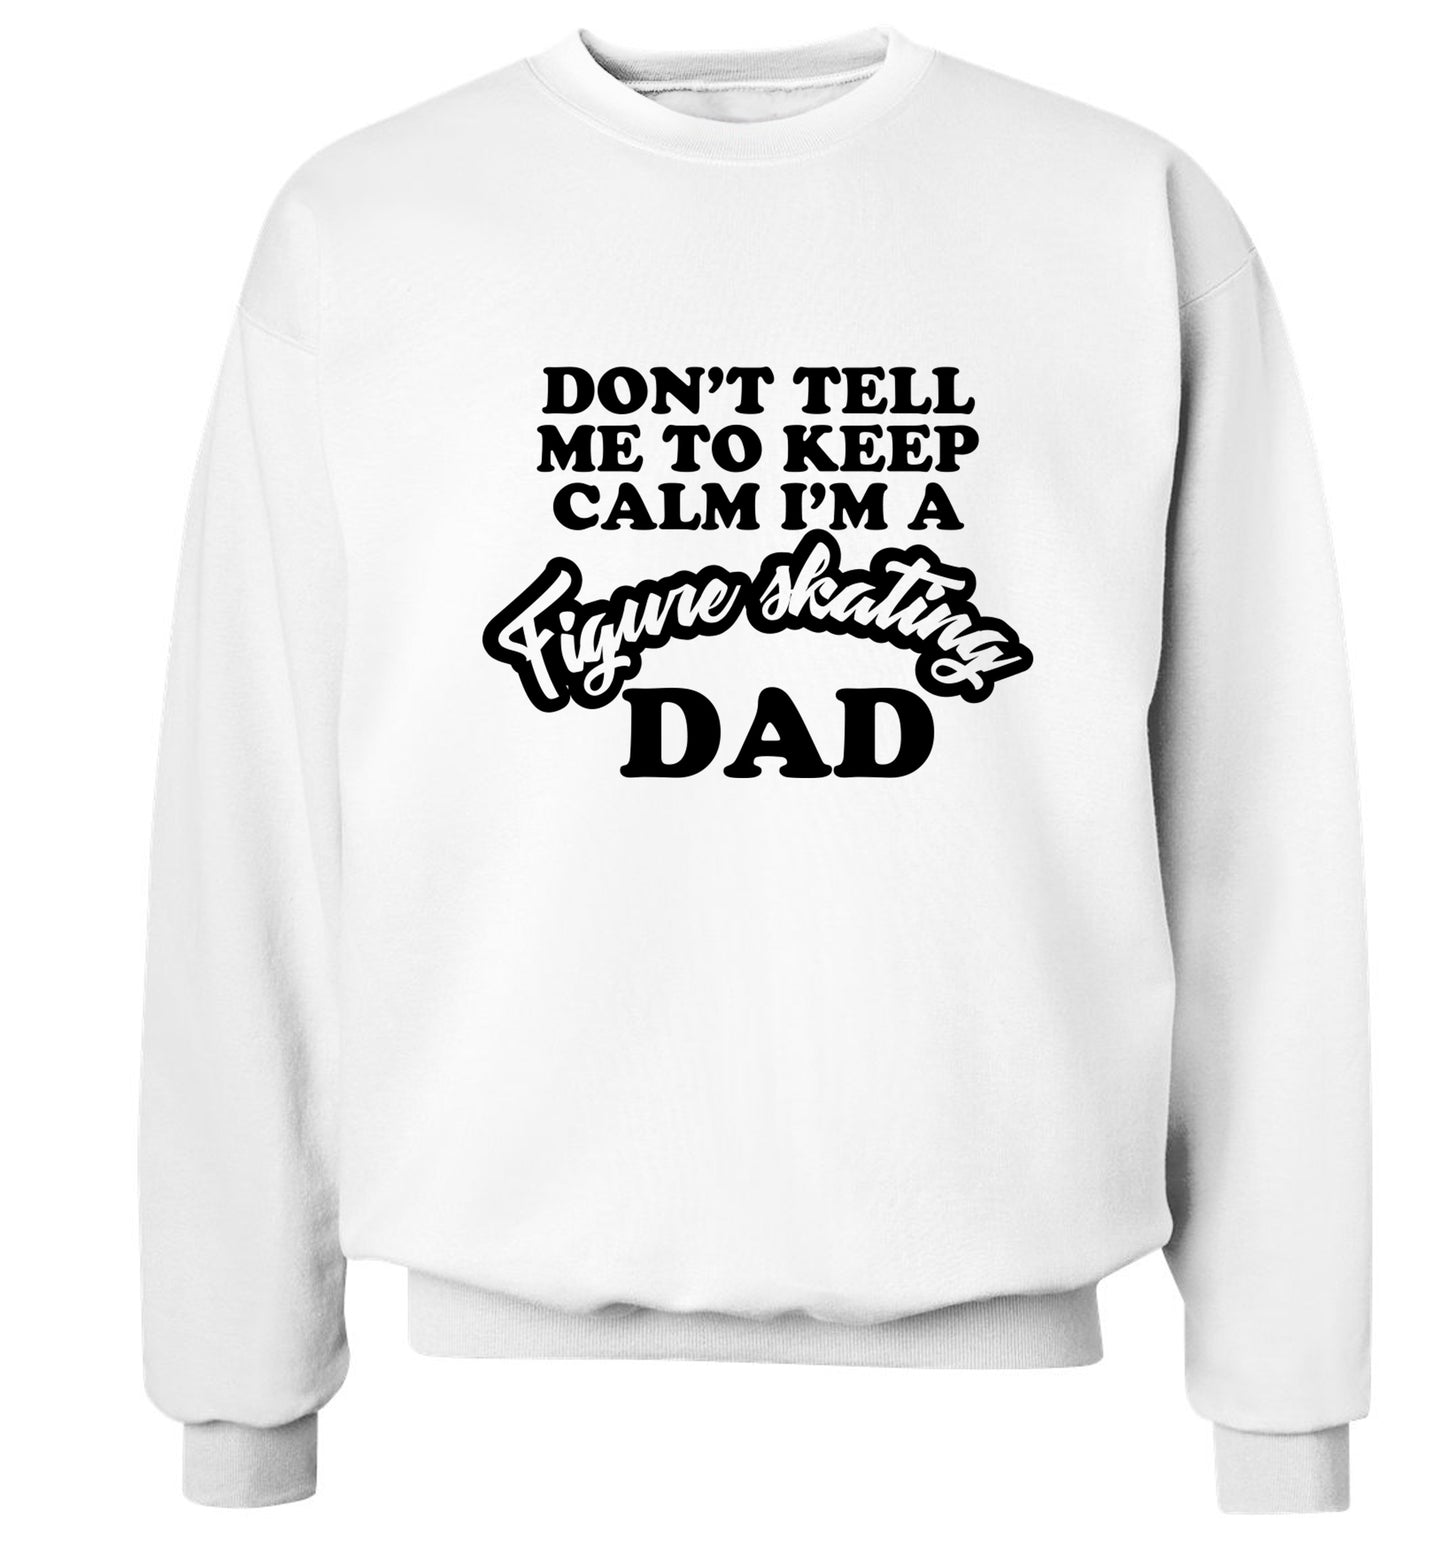 Don't tell me to keep calm I'm a figure skating dad Adult's unisexwhite Sweater 2XL